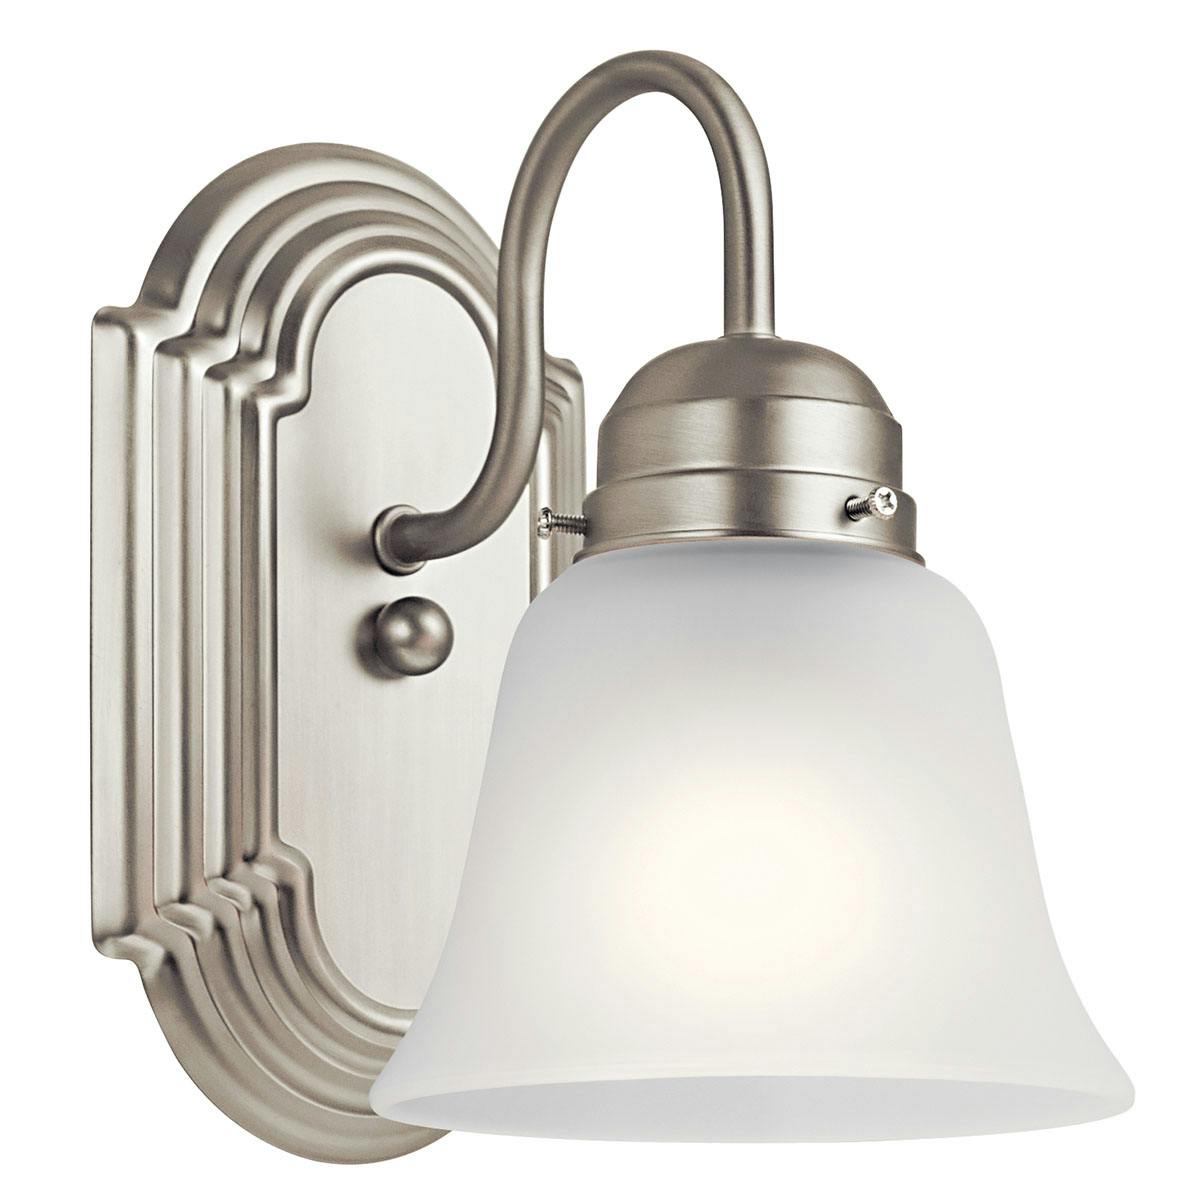 1 Light Wall Sconce Brushed Nickel on a white background